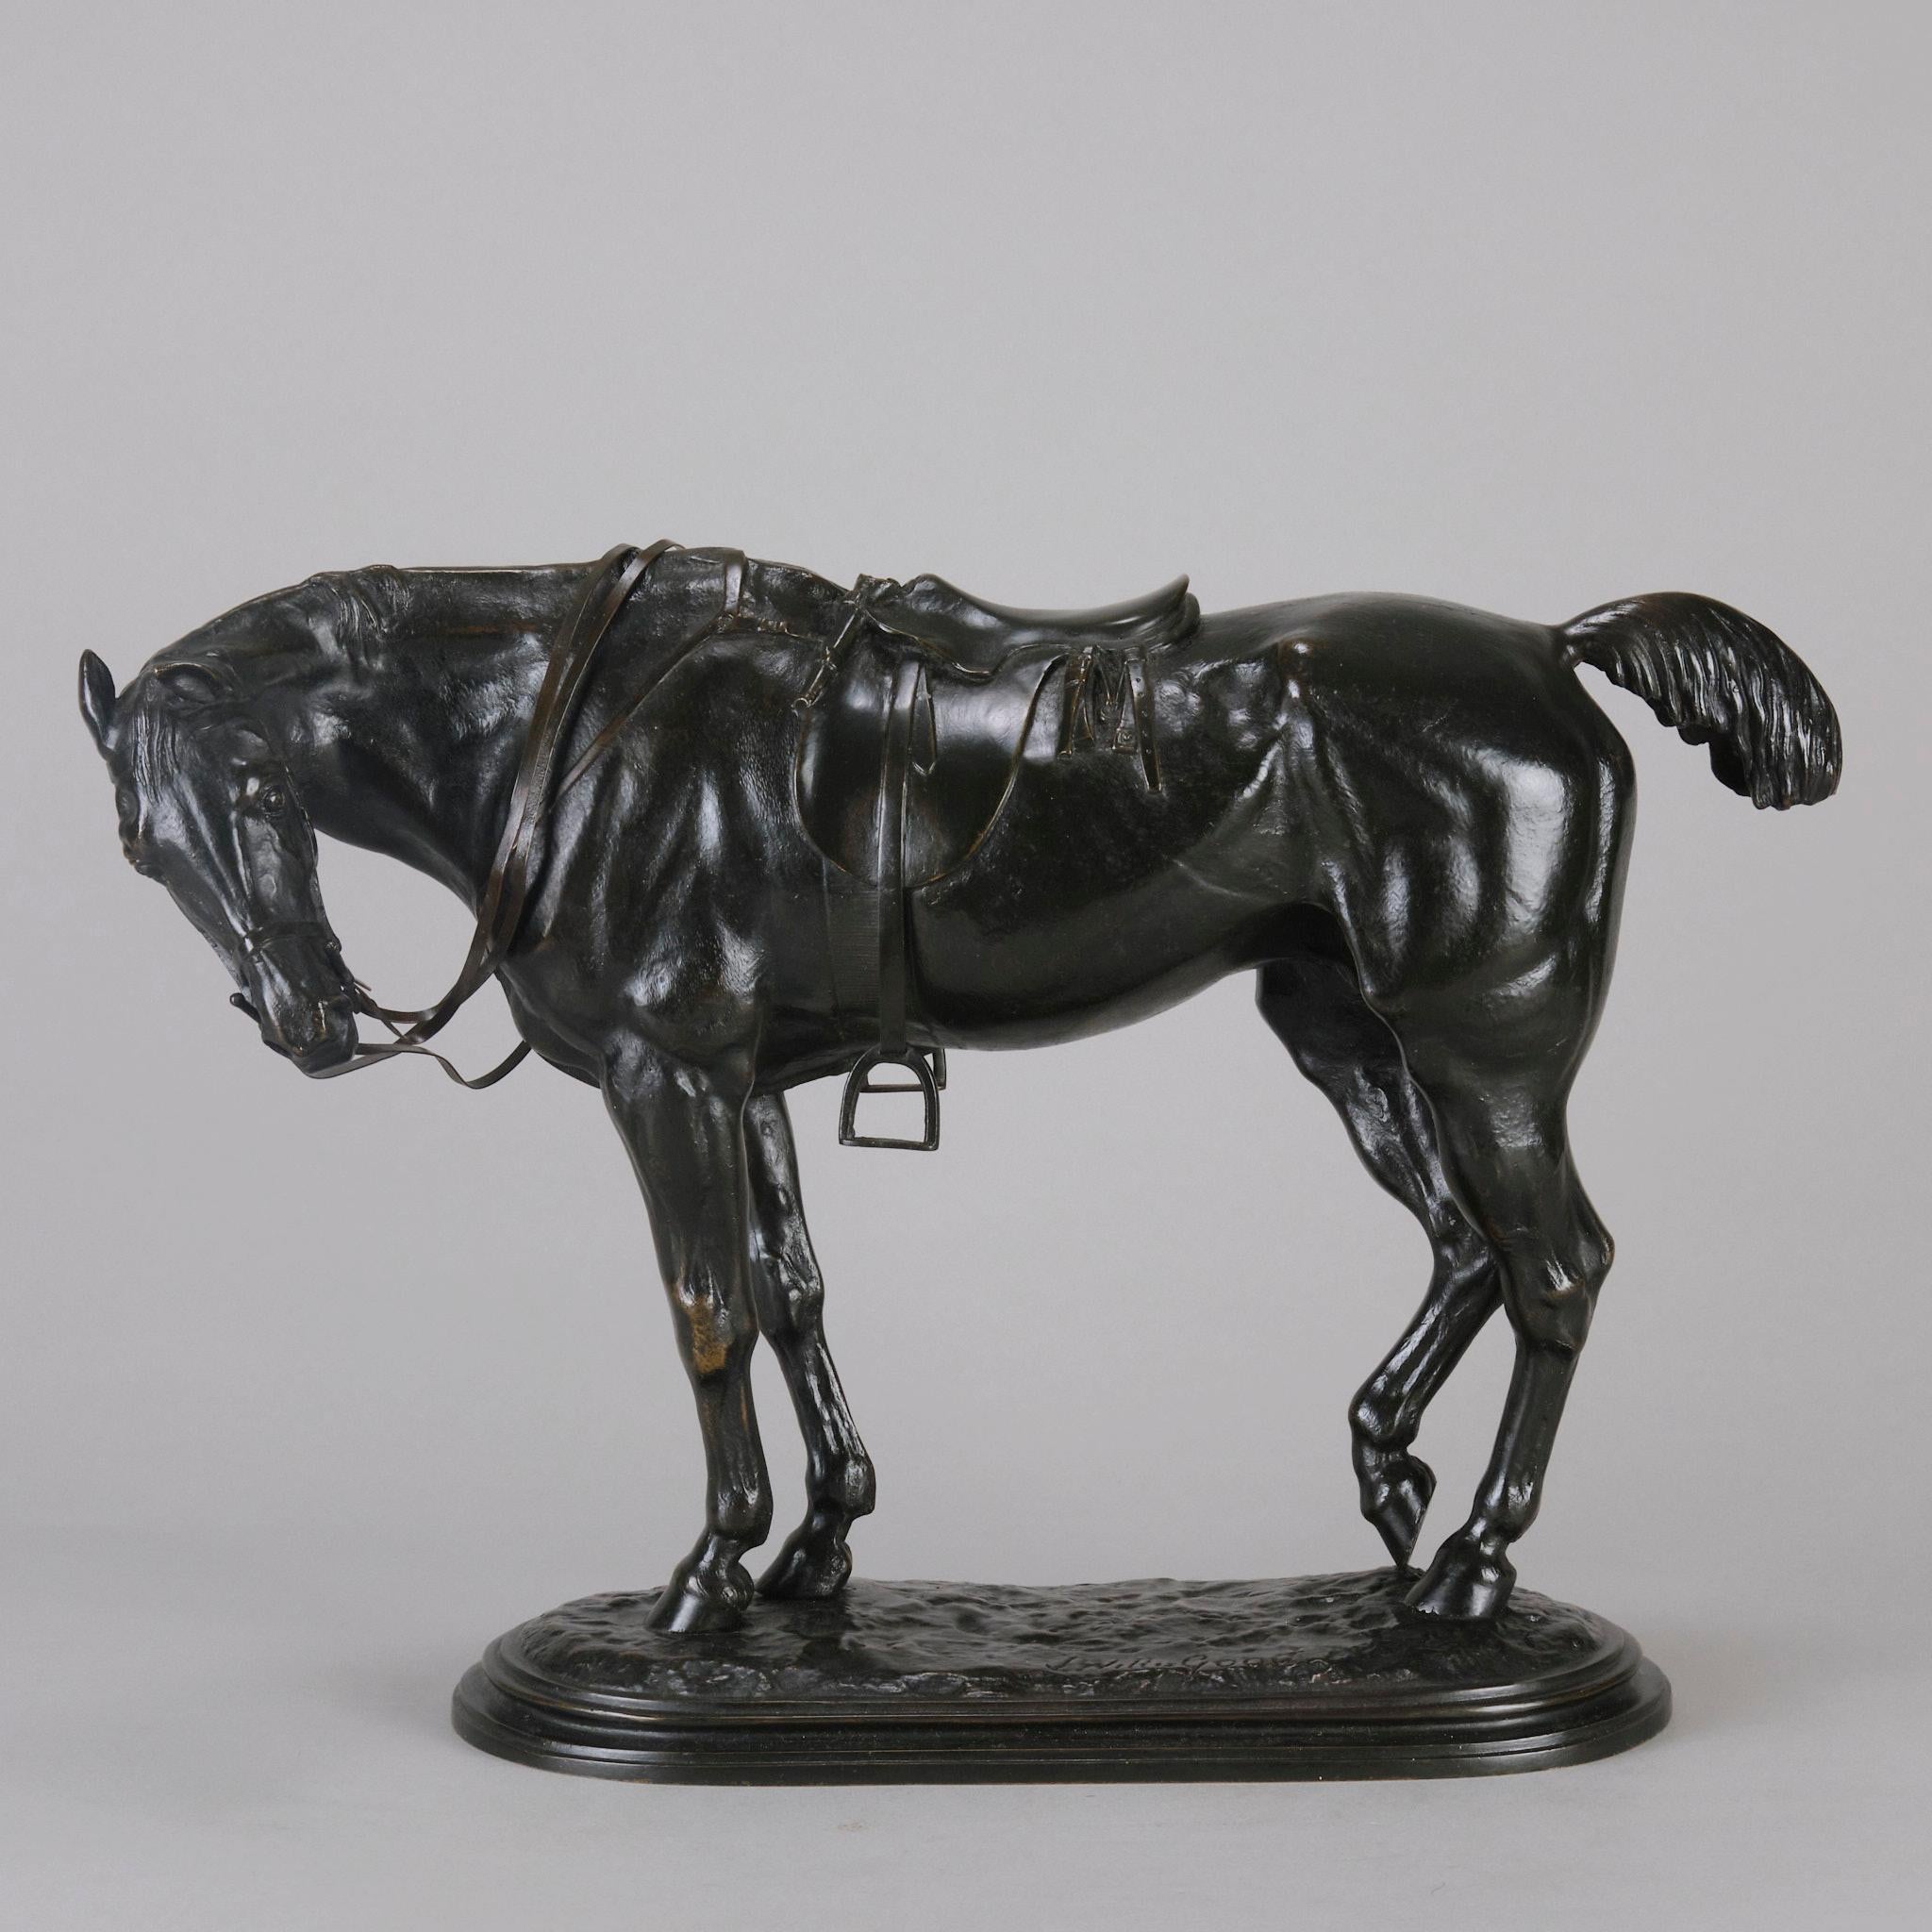 An excellent late 19th century English Animalier bronze study of a tried hunter in full tack taking a break with his neck turned and back leg rested. The bronze exhibiting very fine hand chased surface detail and wonderful rich brown patina, raised